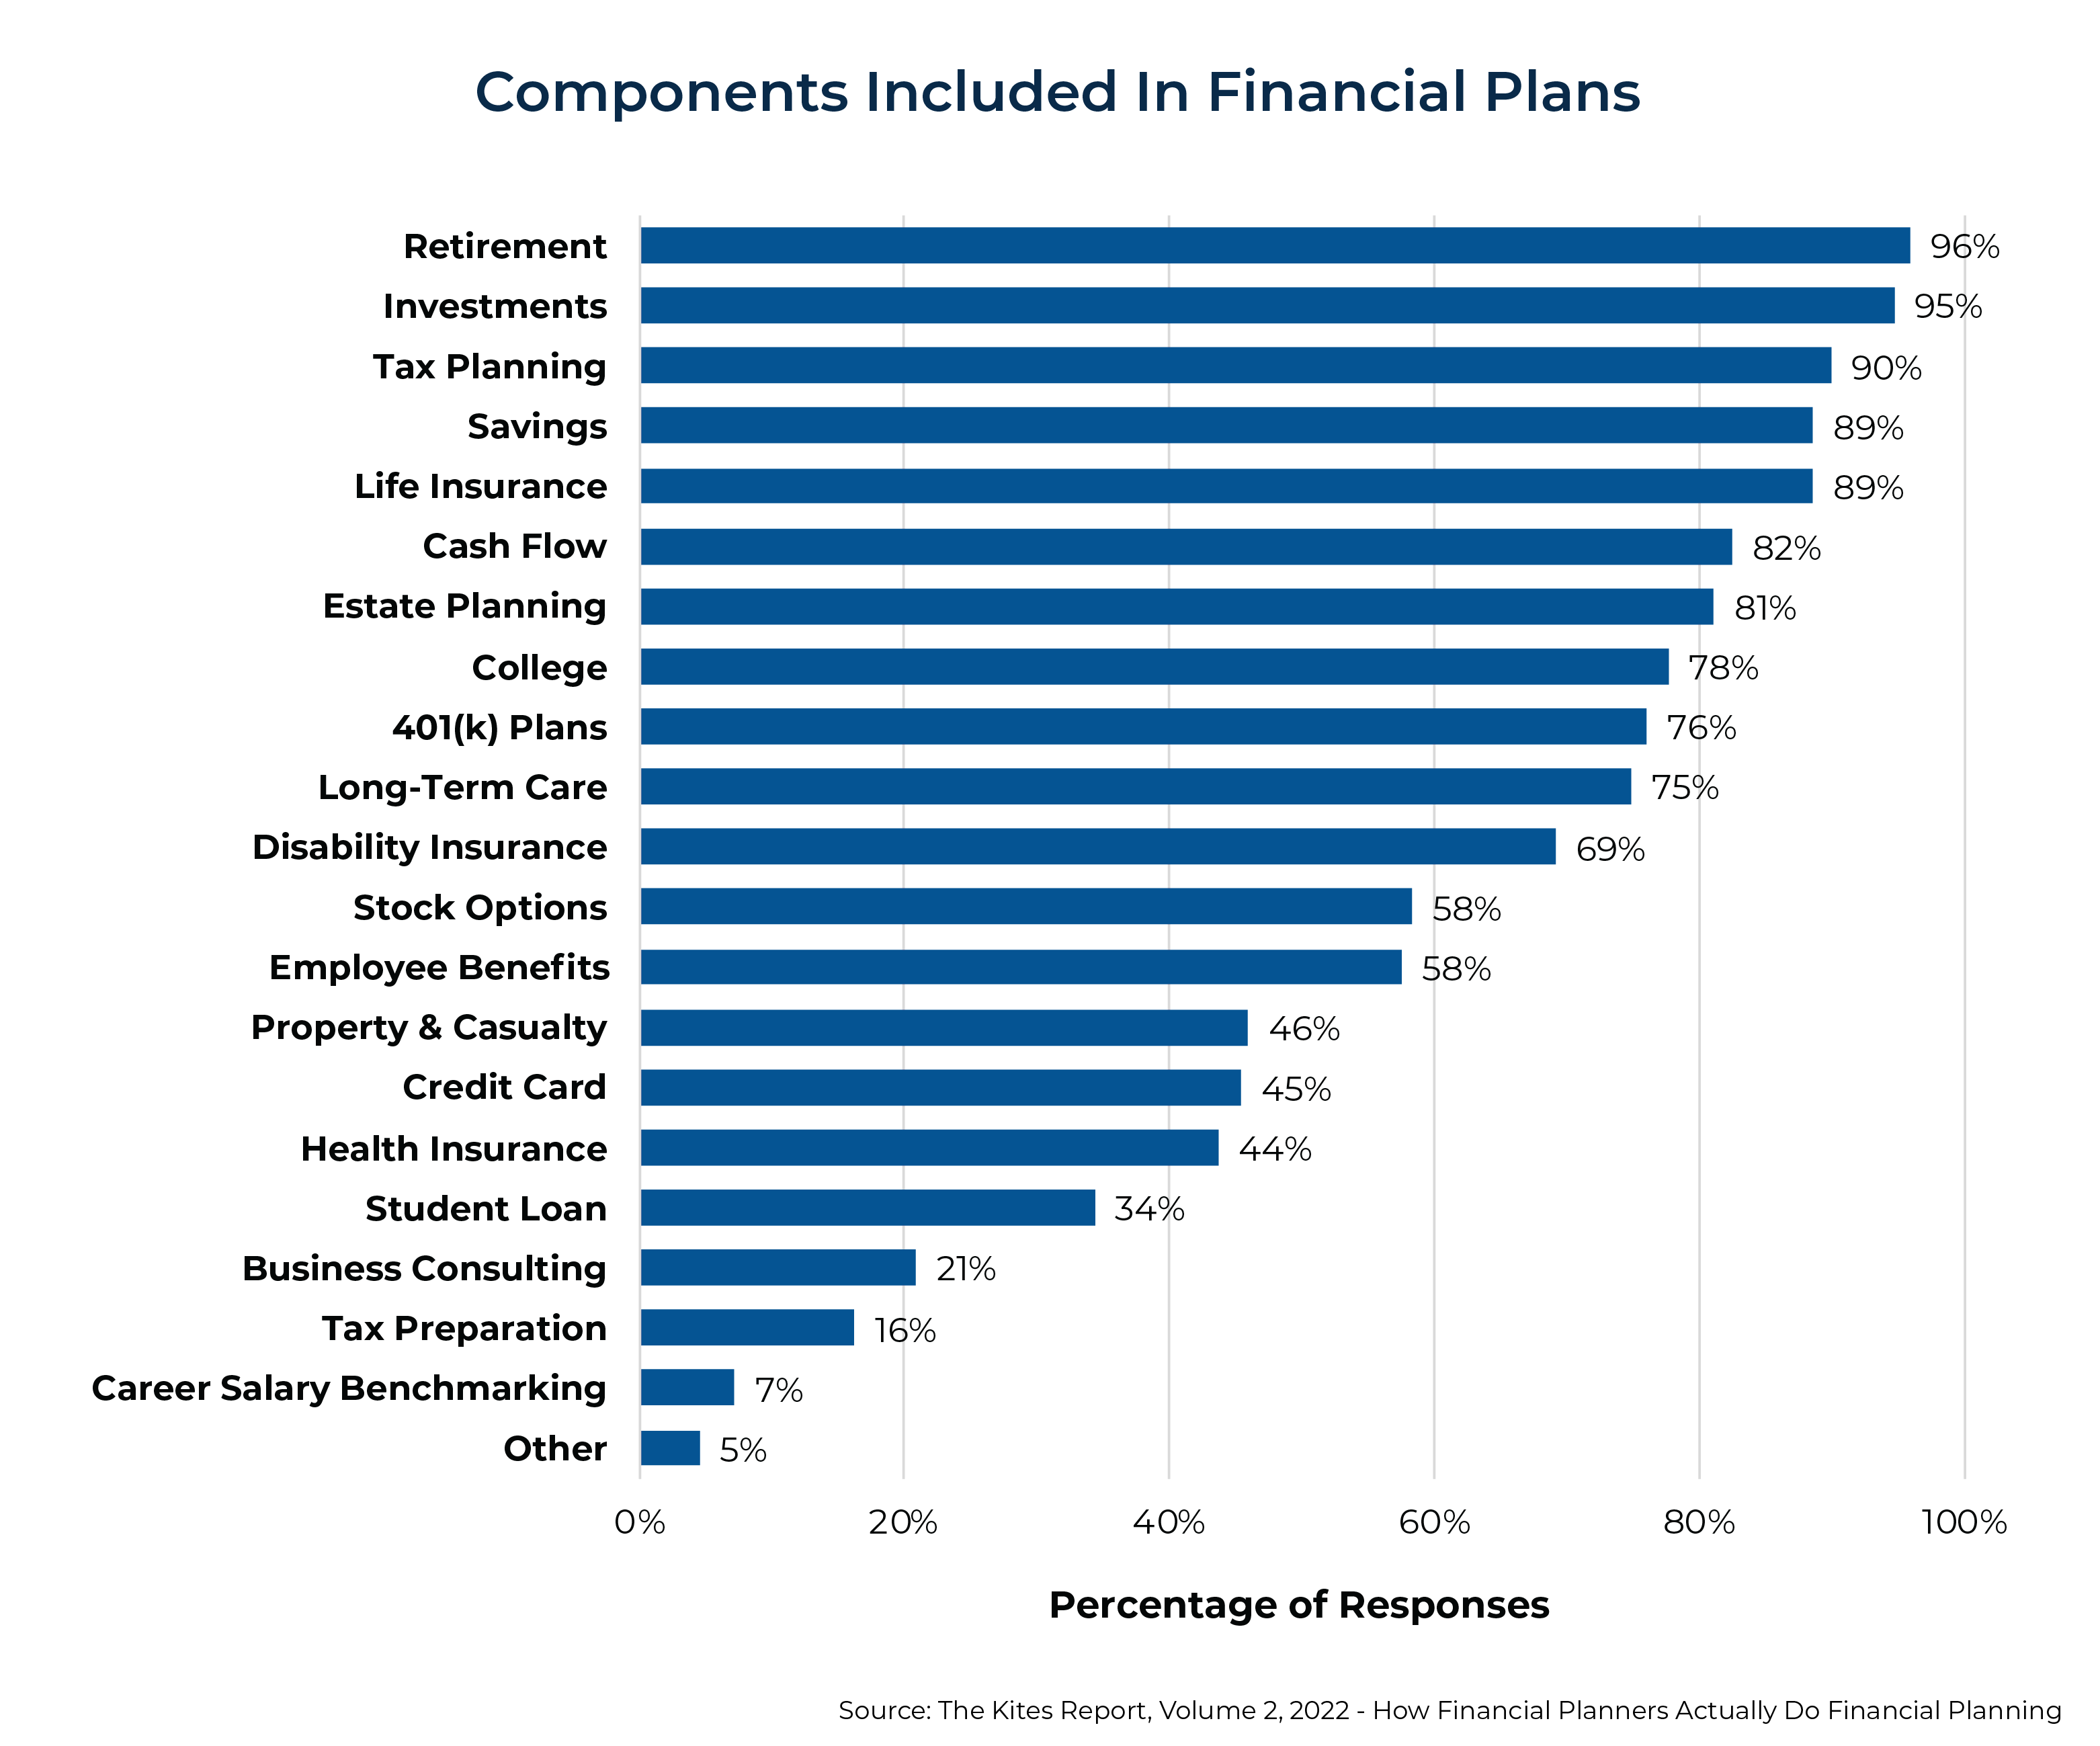 Components Included In Financial Plans